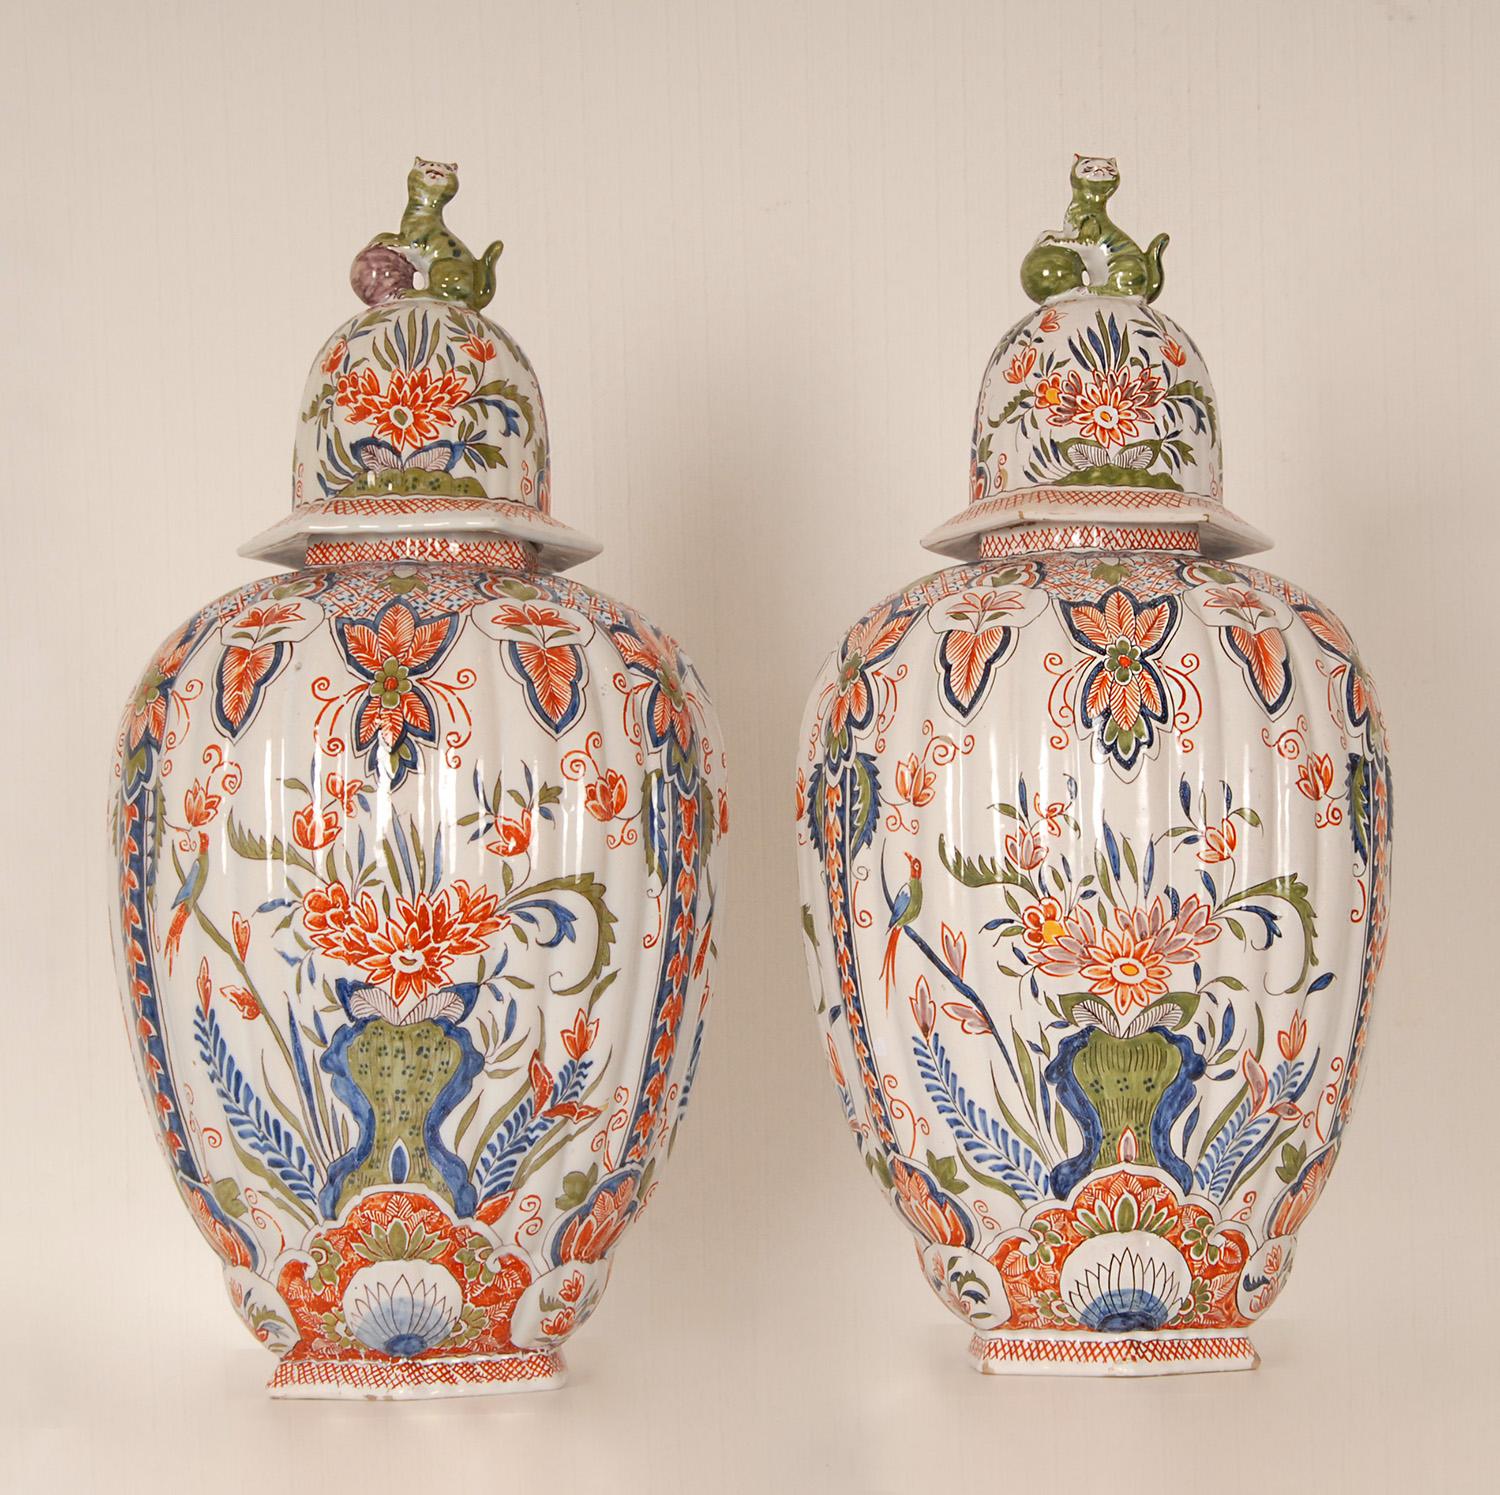 Antique Delft Vases Polychrome Covered Baluster Vases With Foo Cats - a pair For Sale 5